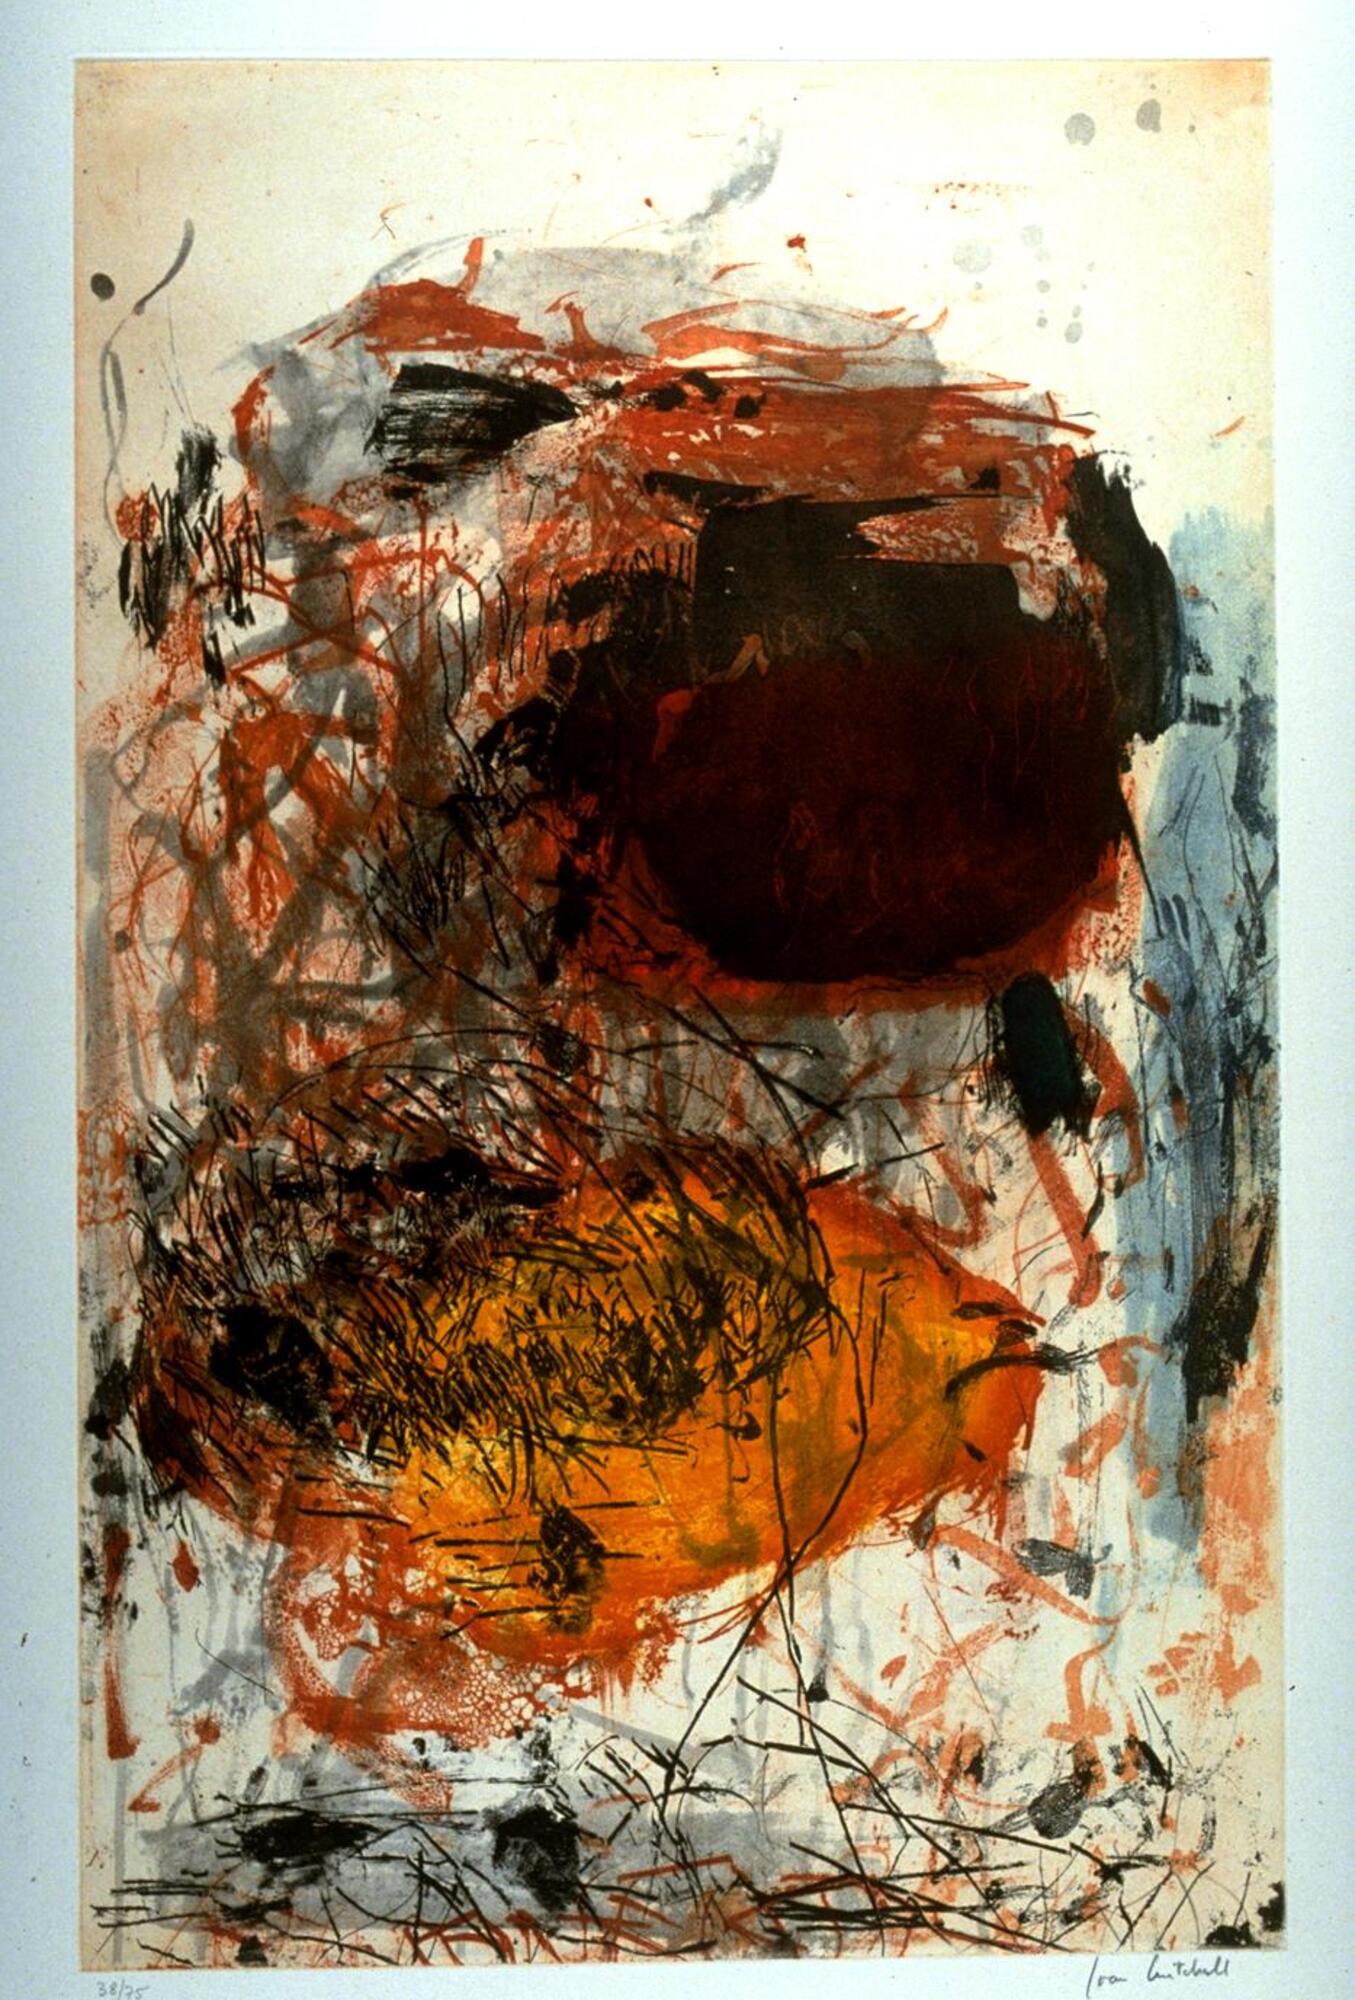 This abstract print has a large dark red and black circular form in the top half of the frame and a large orange and red circular form in lower half.  Black splotches and expressive lines dominate and overlap much of the image.